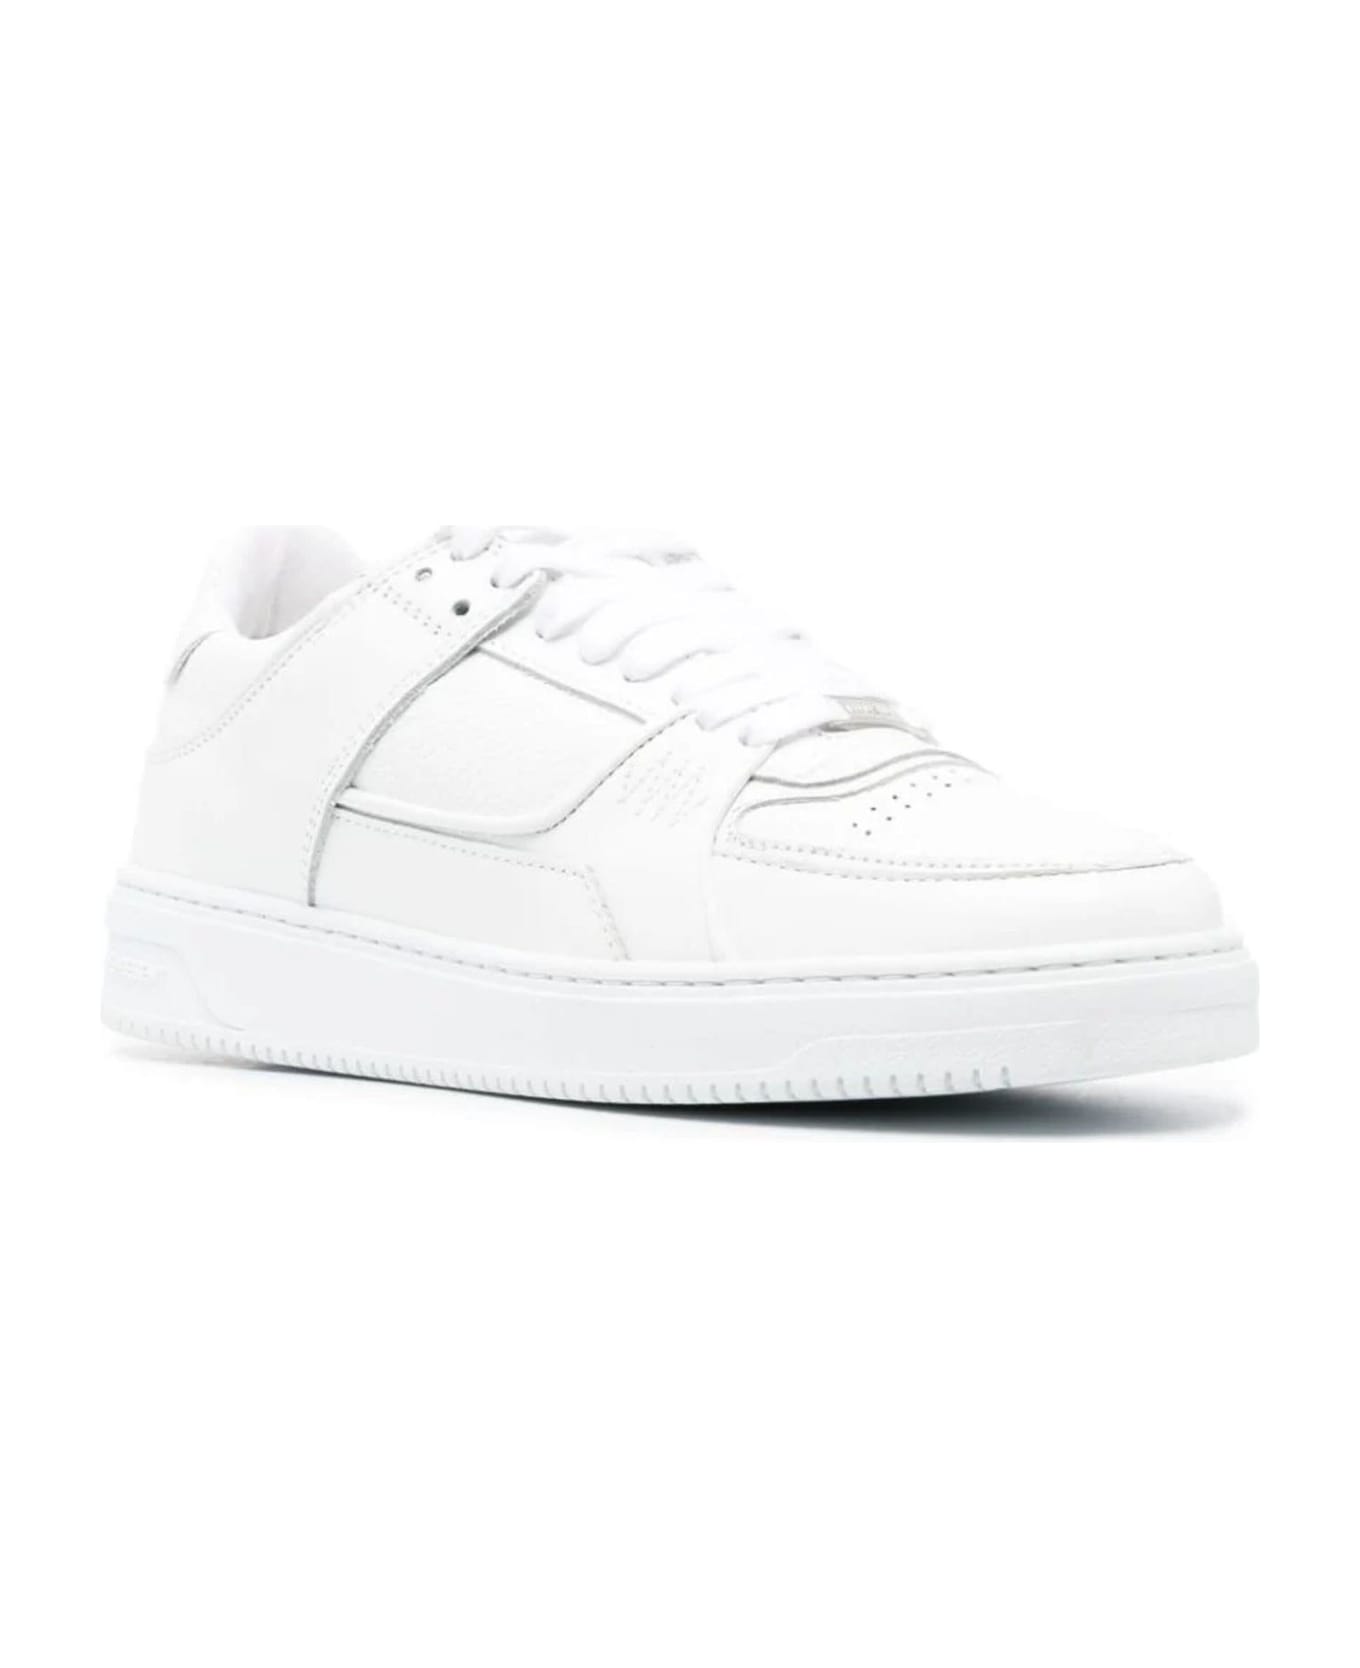 REPRESENT White Calf Leather Apex Sneakers Sneakers - FLAT WHITE